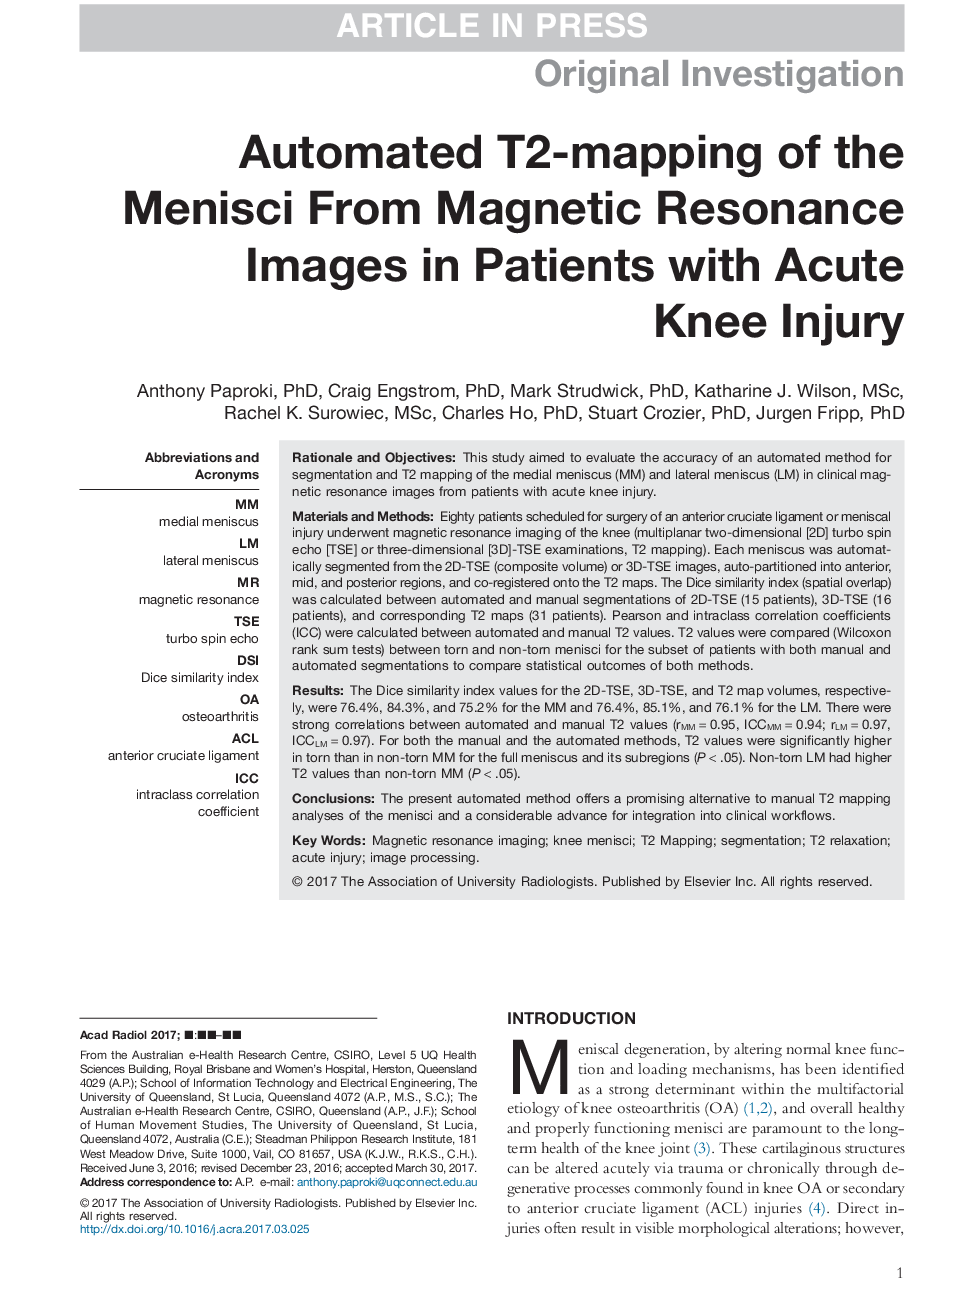 Automated T2-mapping of the Menisci From Magnetic Resonance Images in Patients with Acute Knee Injury